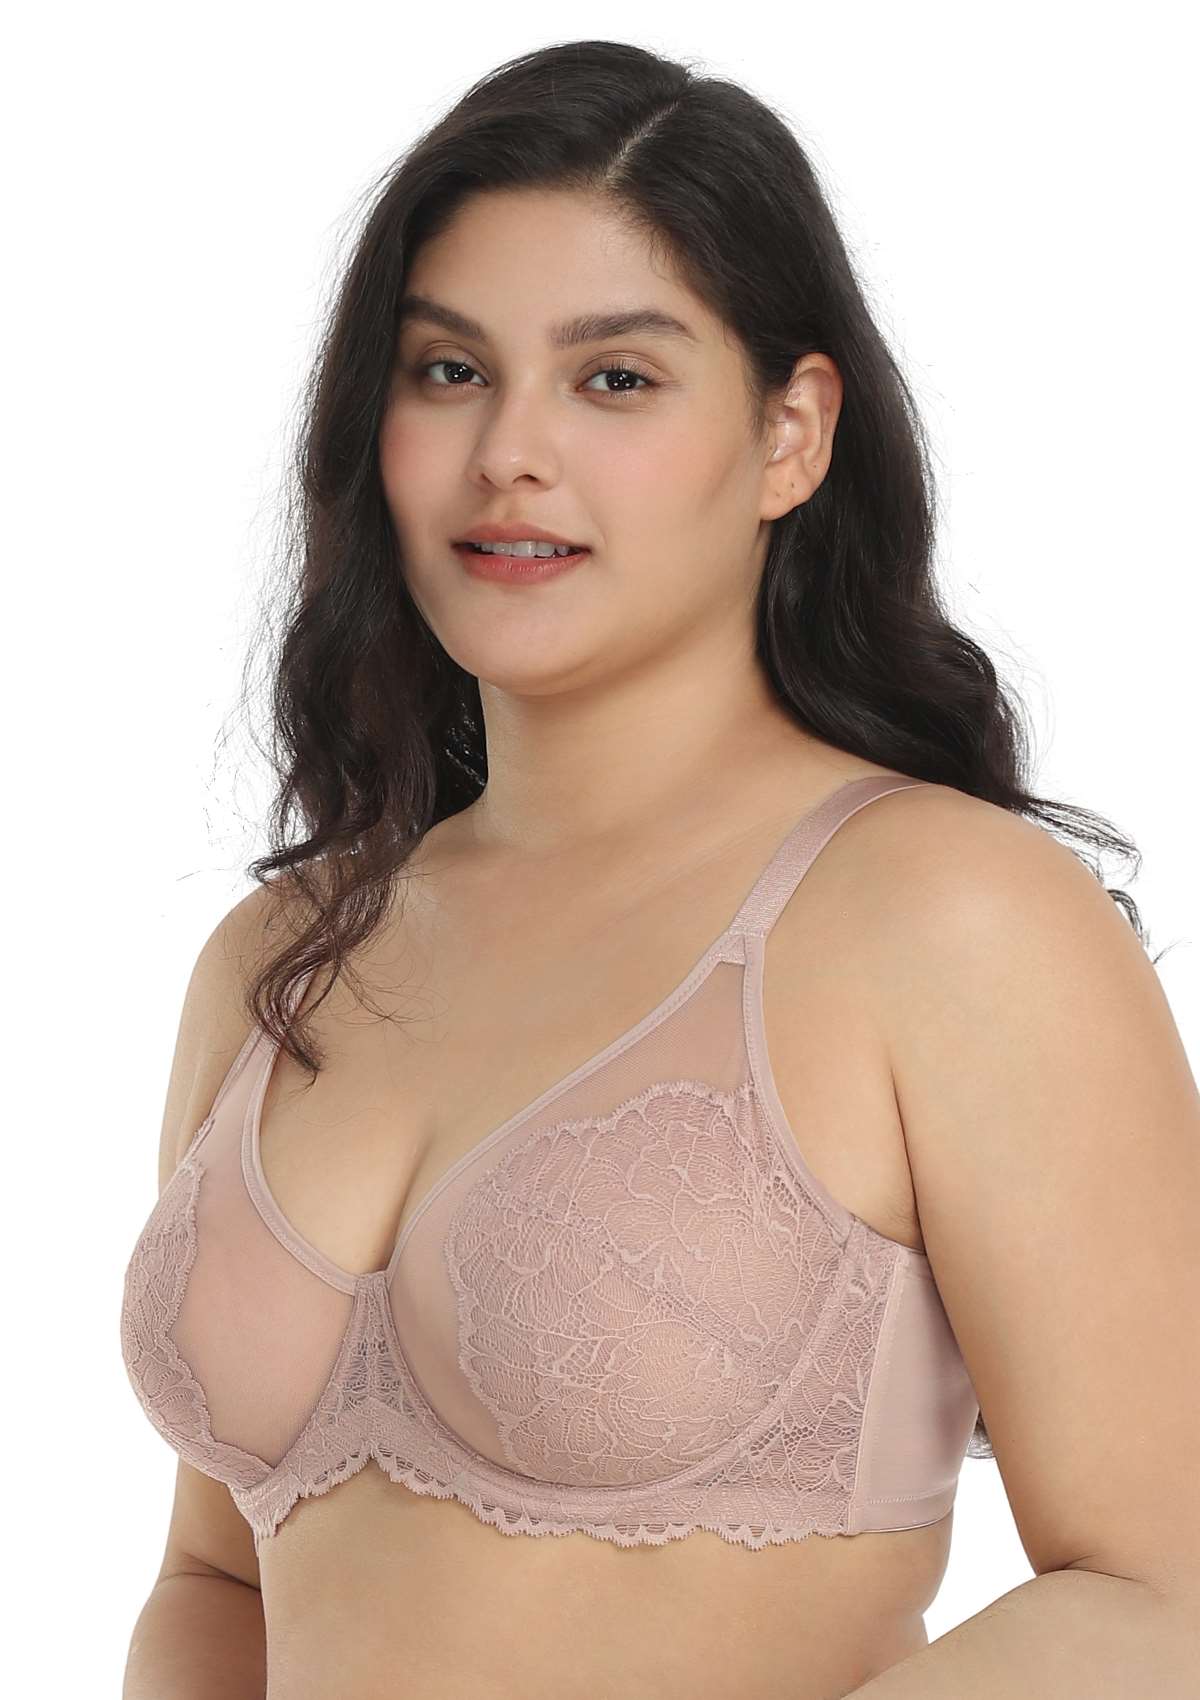 HSIA Blossom Lace Bra And Panties Set: Best Bra For Large Busts - Dark Pink / 38 / C